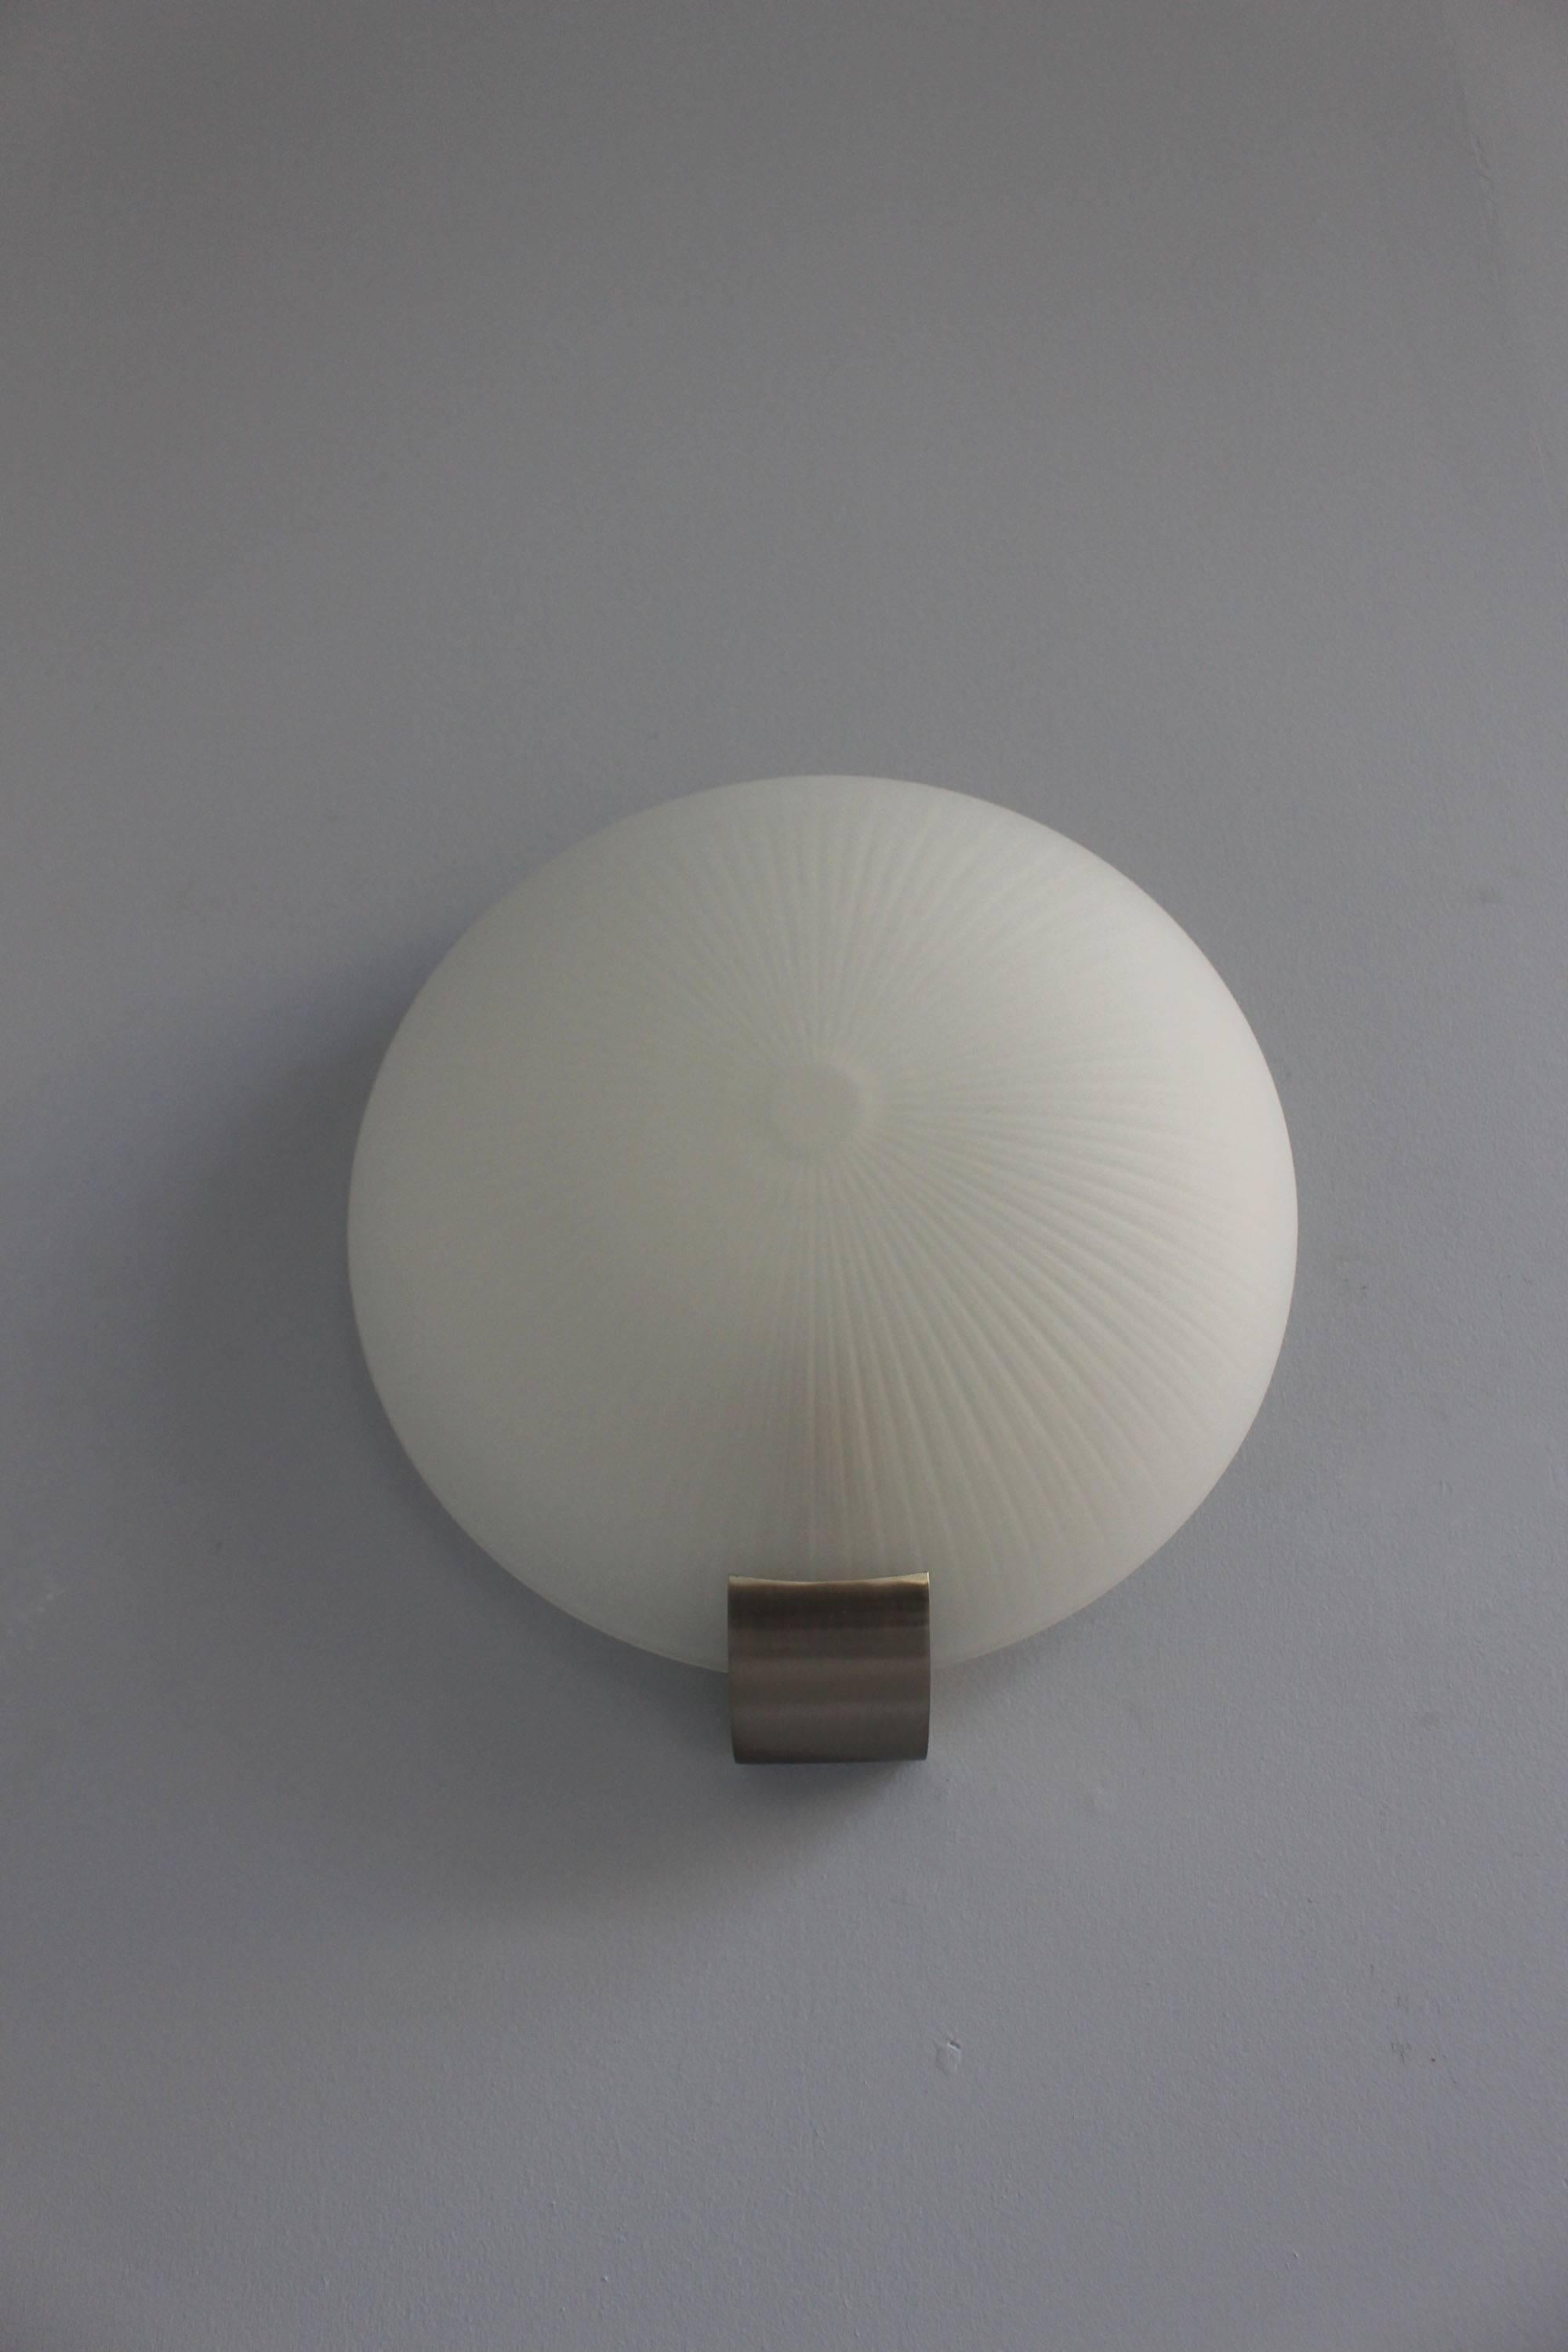 With a fluted round frosted glass shade mounted on a brushed chrome base.